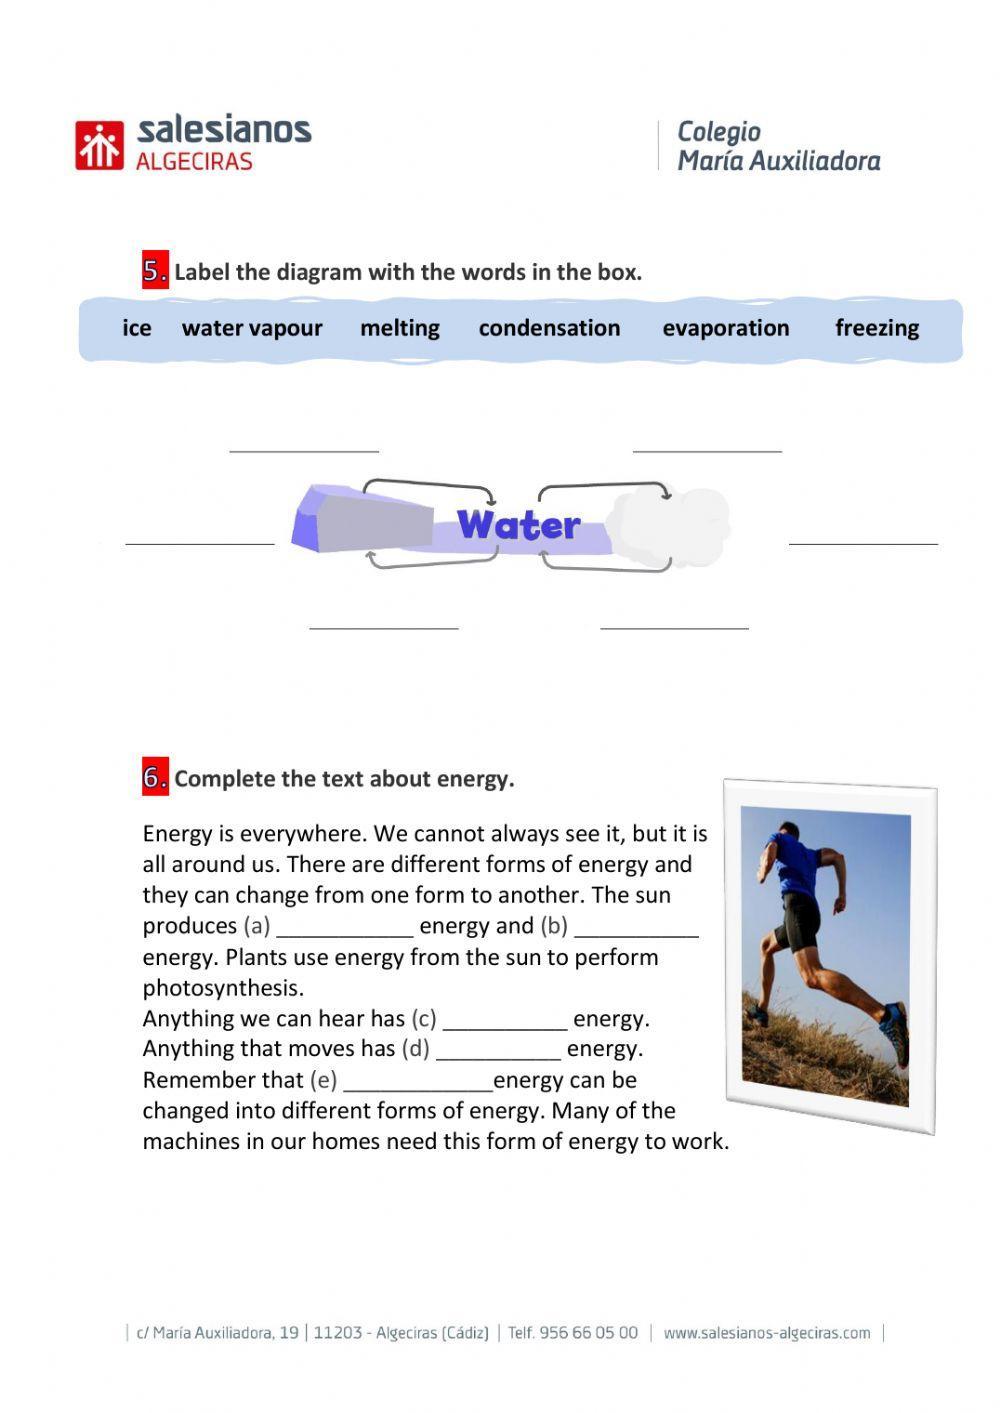 State of water, energy and mixtures